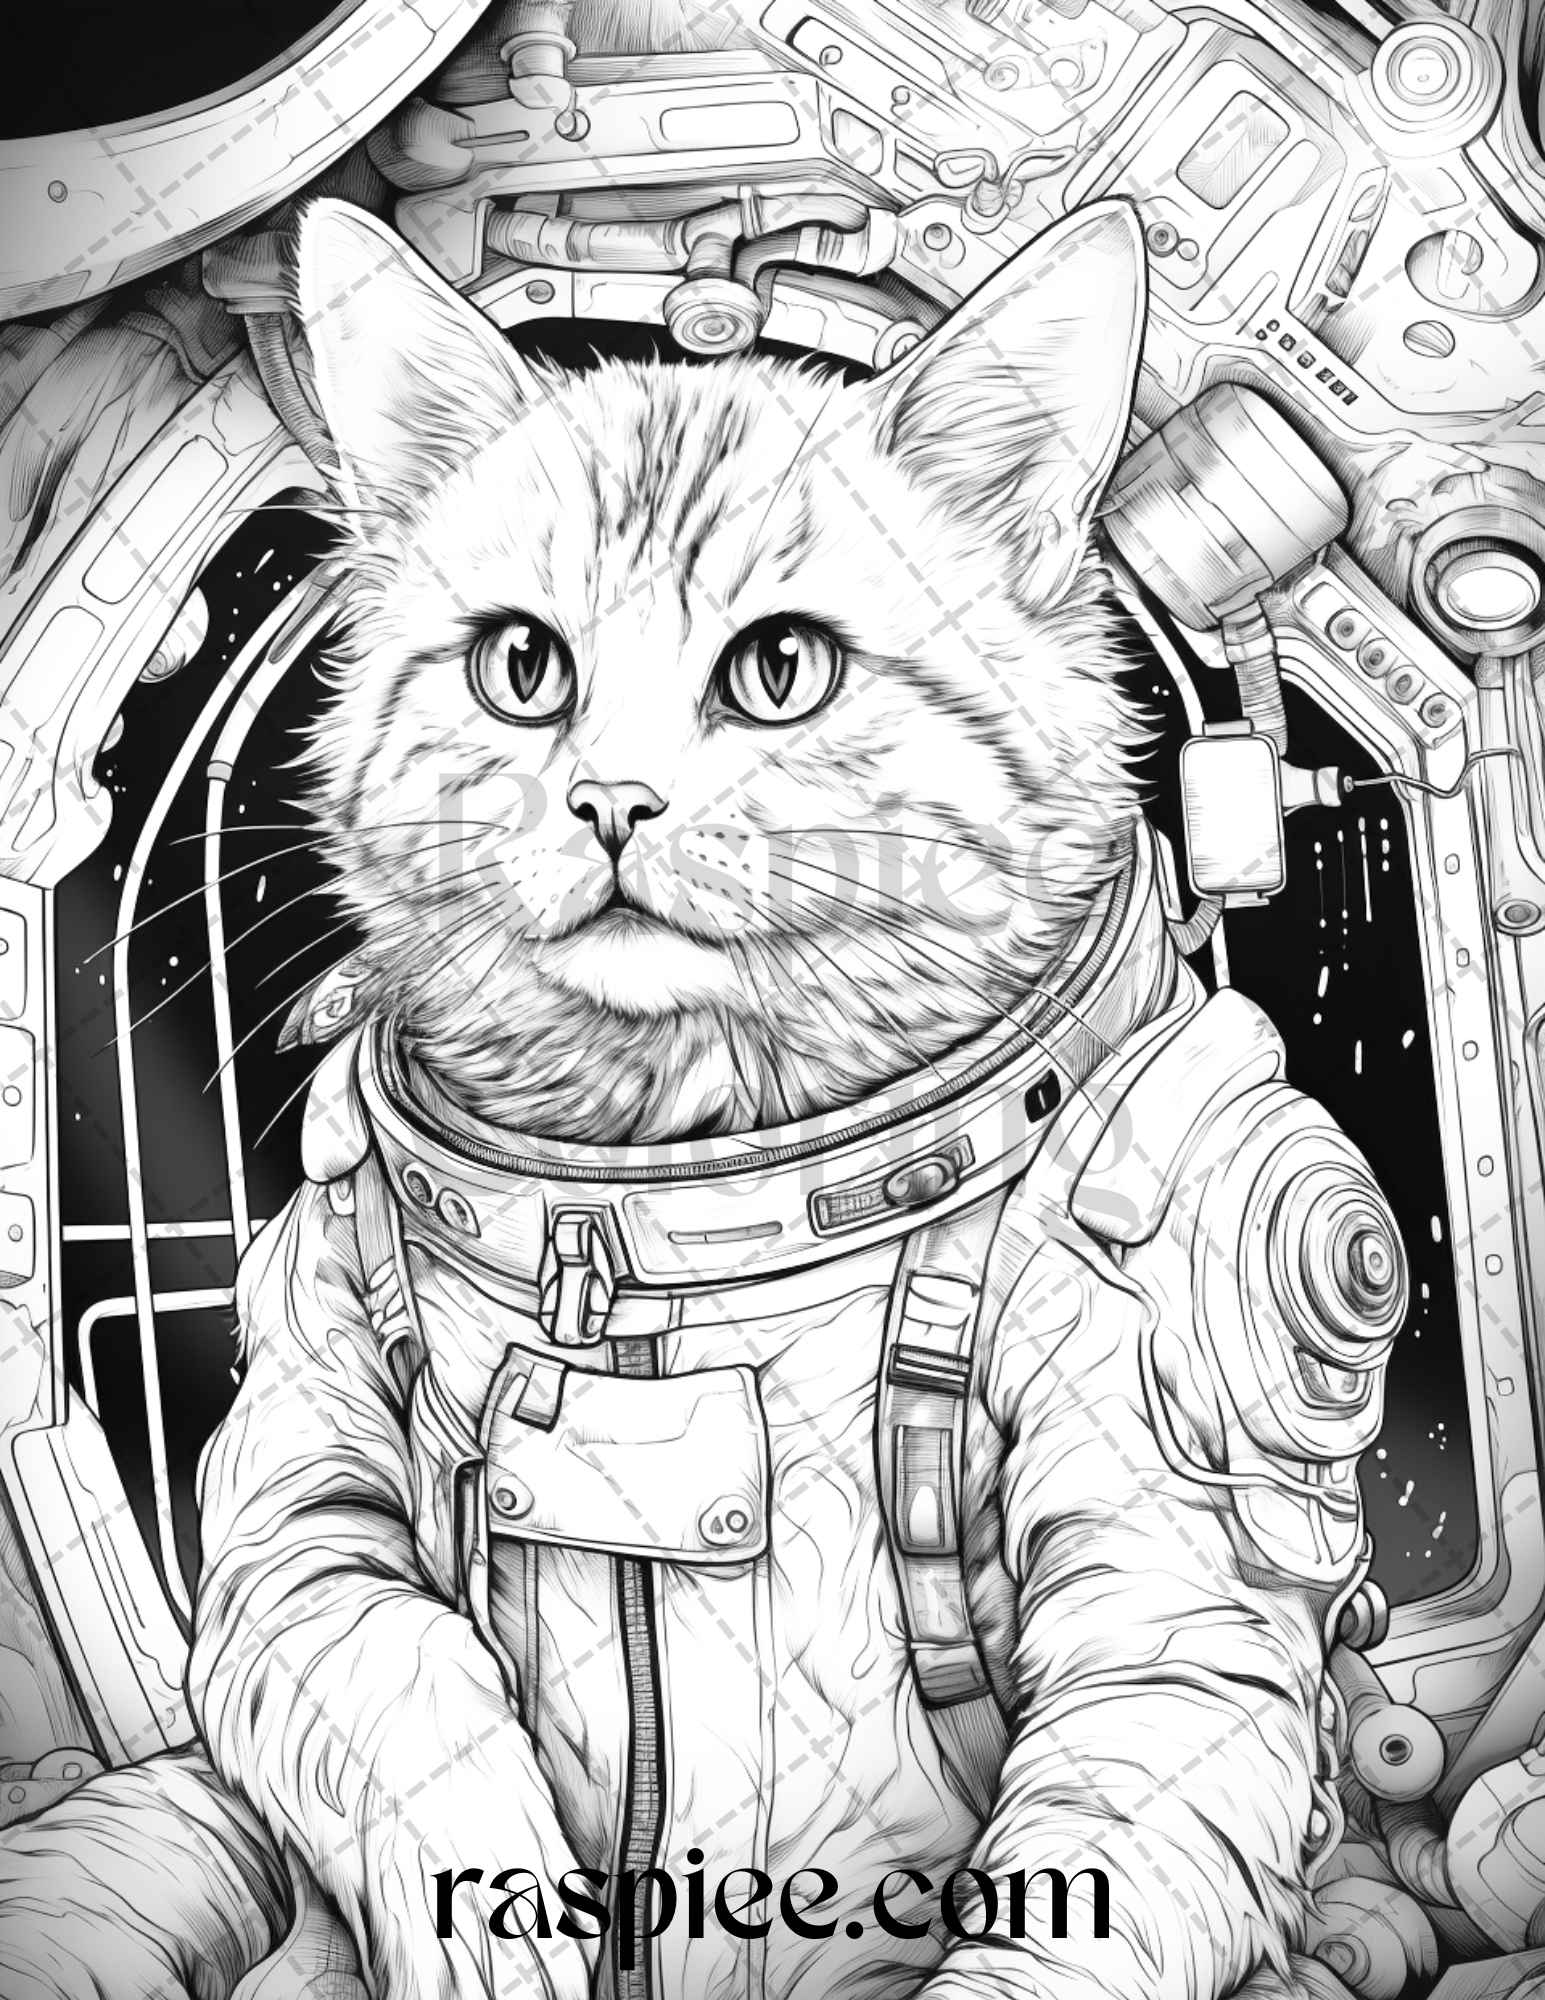 cat astronaut grayscale coloring pages, printable coloring pages for adults and kids, space adventure coloring book